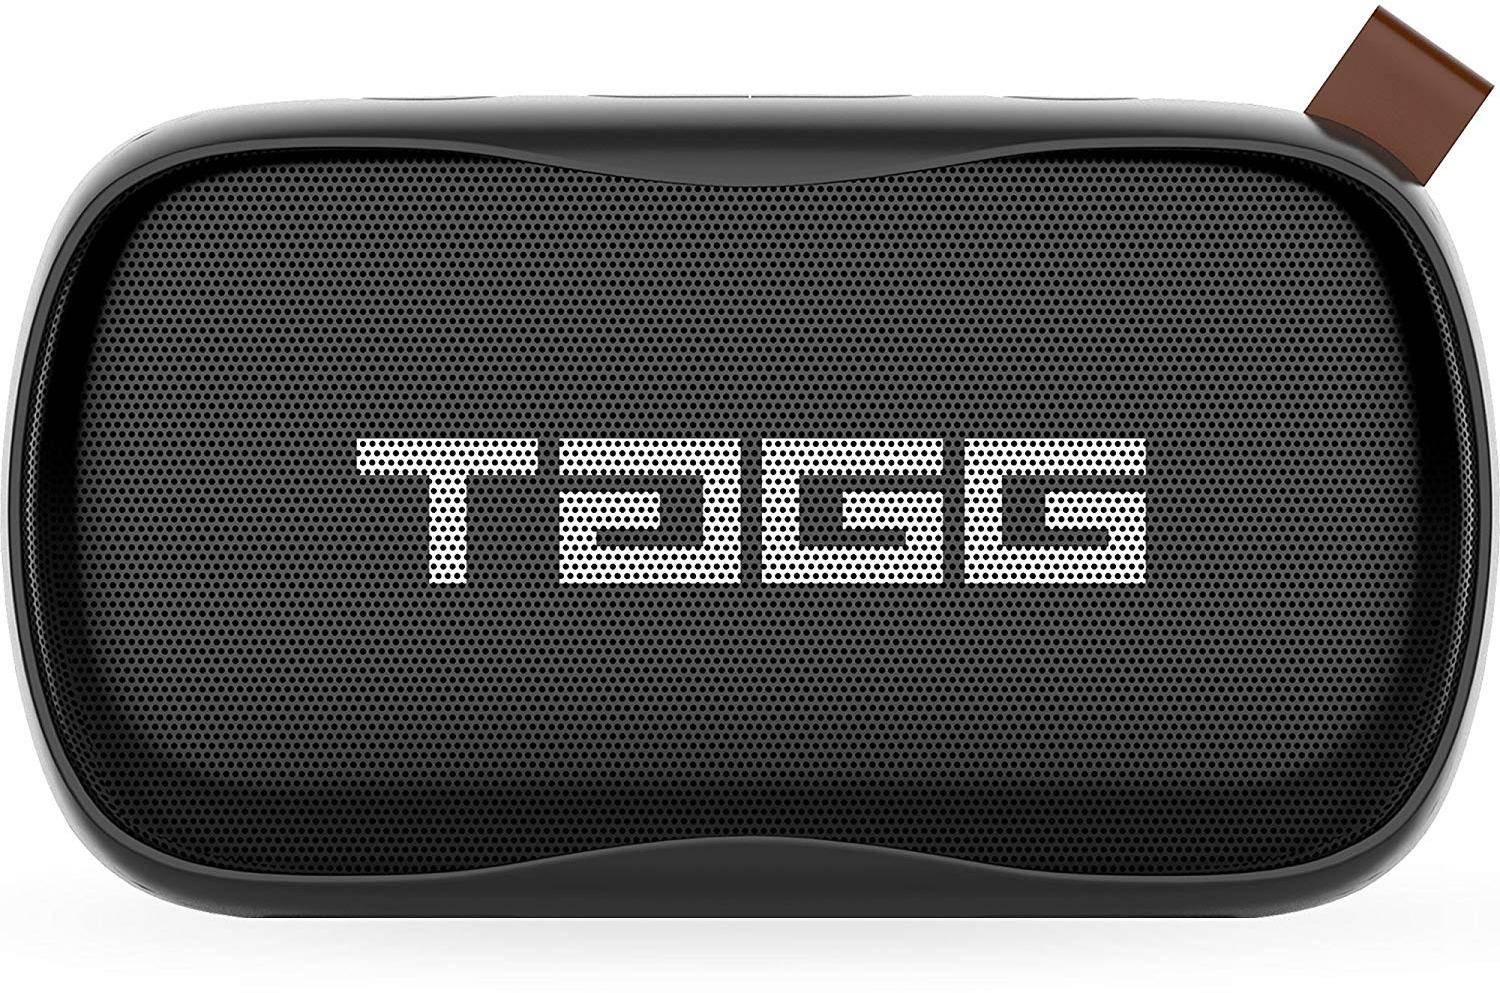 TAGG Flex Portable Wireless Bluetooth Speaker with Mic zoom image